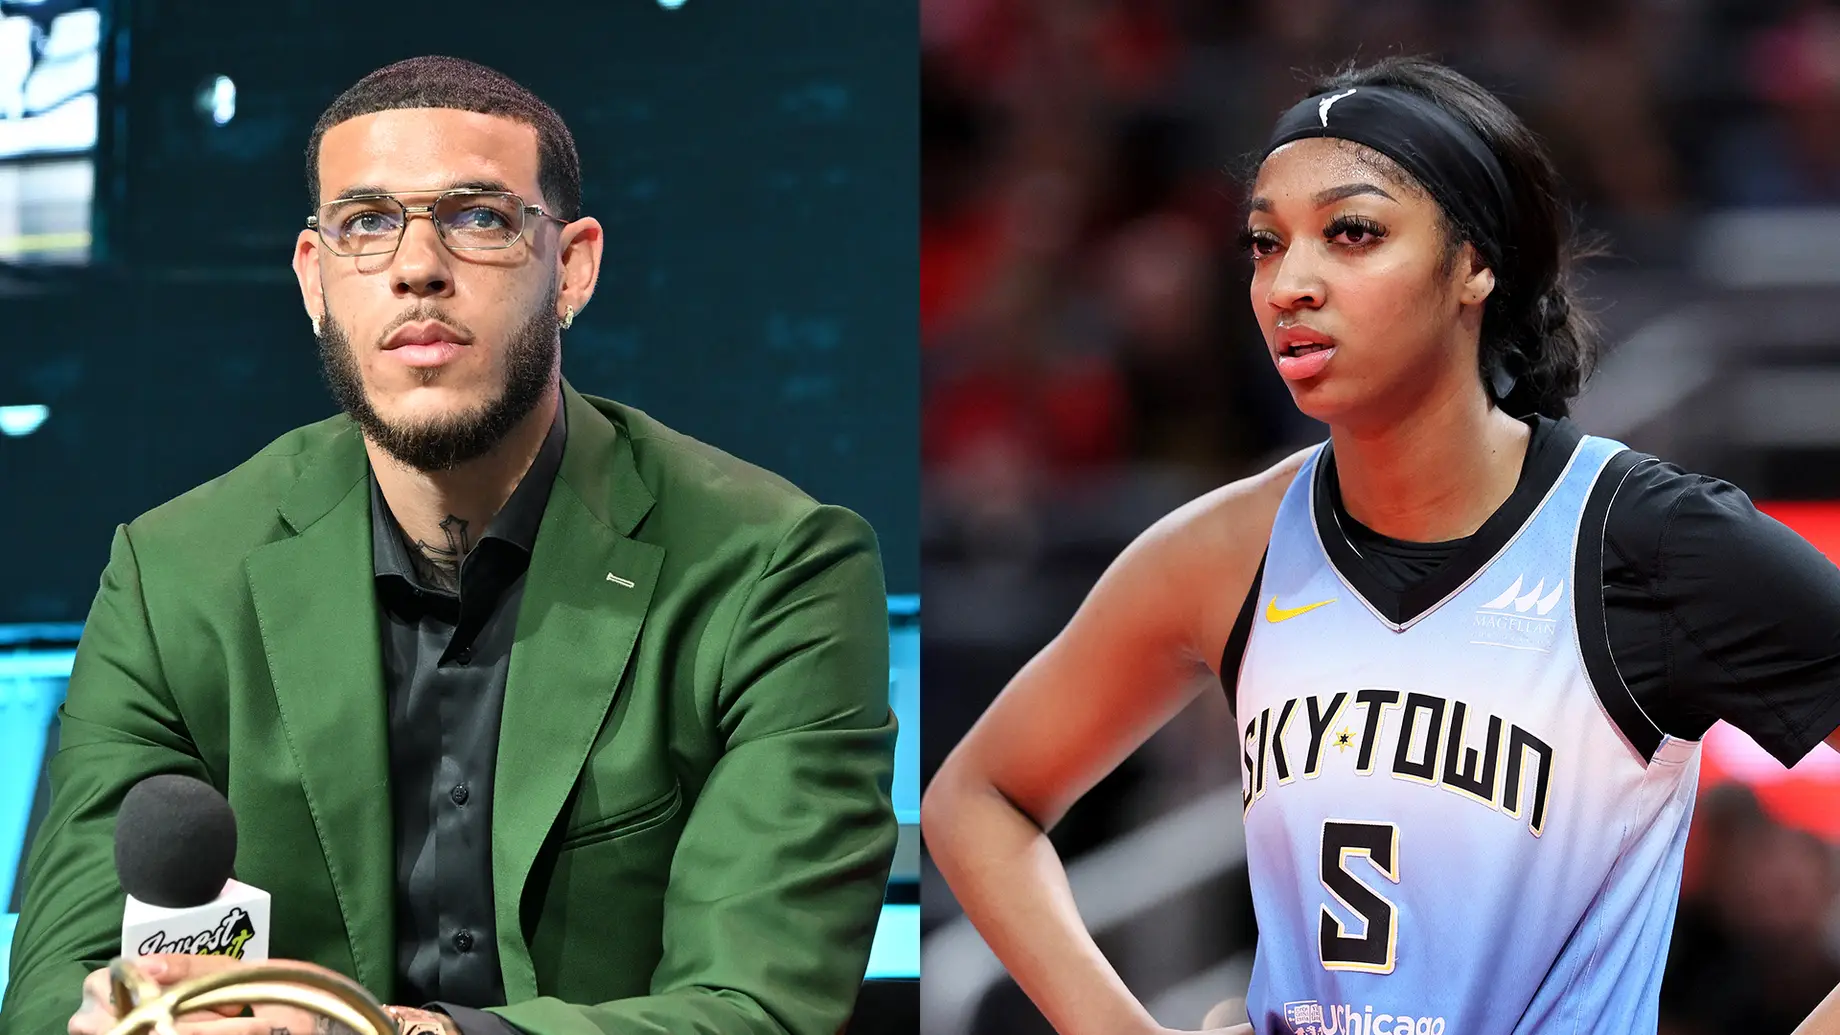 Lonzo Ball Offers to Pay Angel Reese’s Fine After She’s Ejected From Game